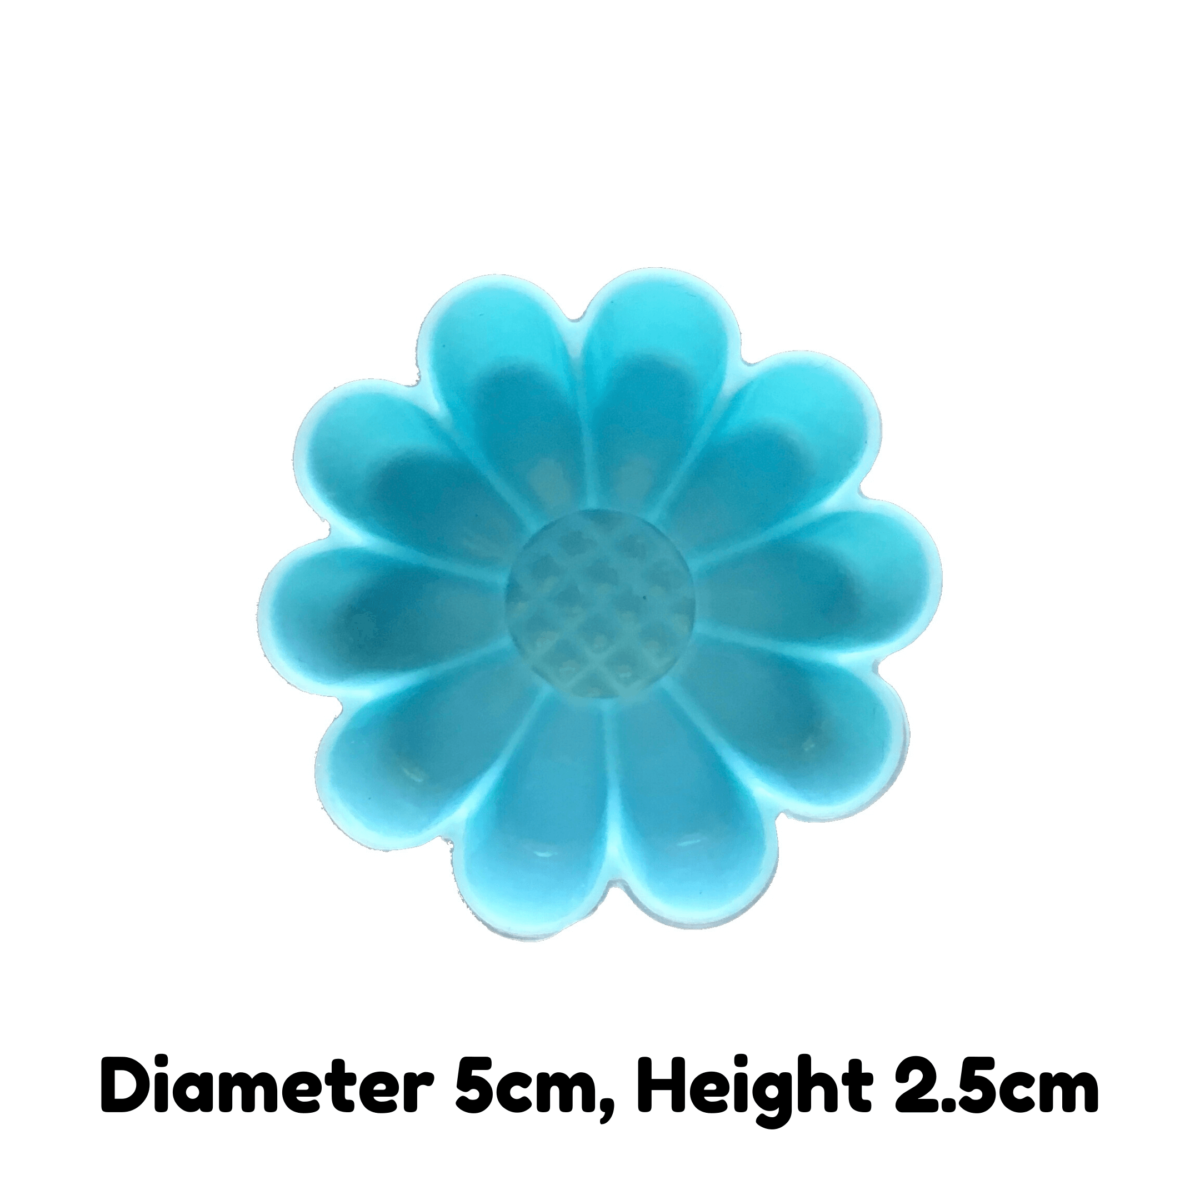 dimensions of 5cm blue daisy flower single cavity silicone mould